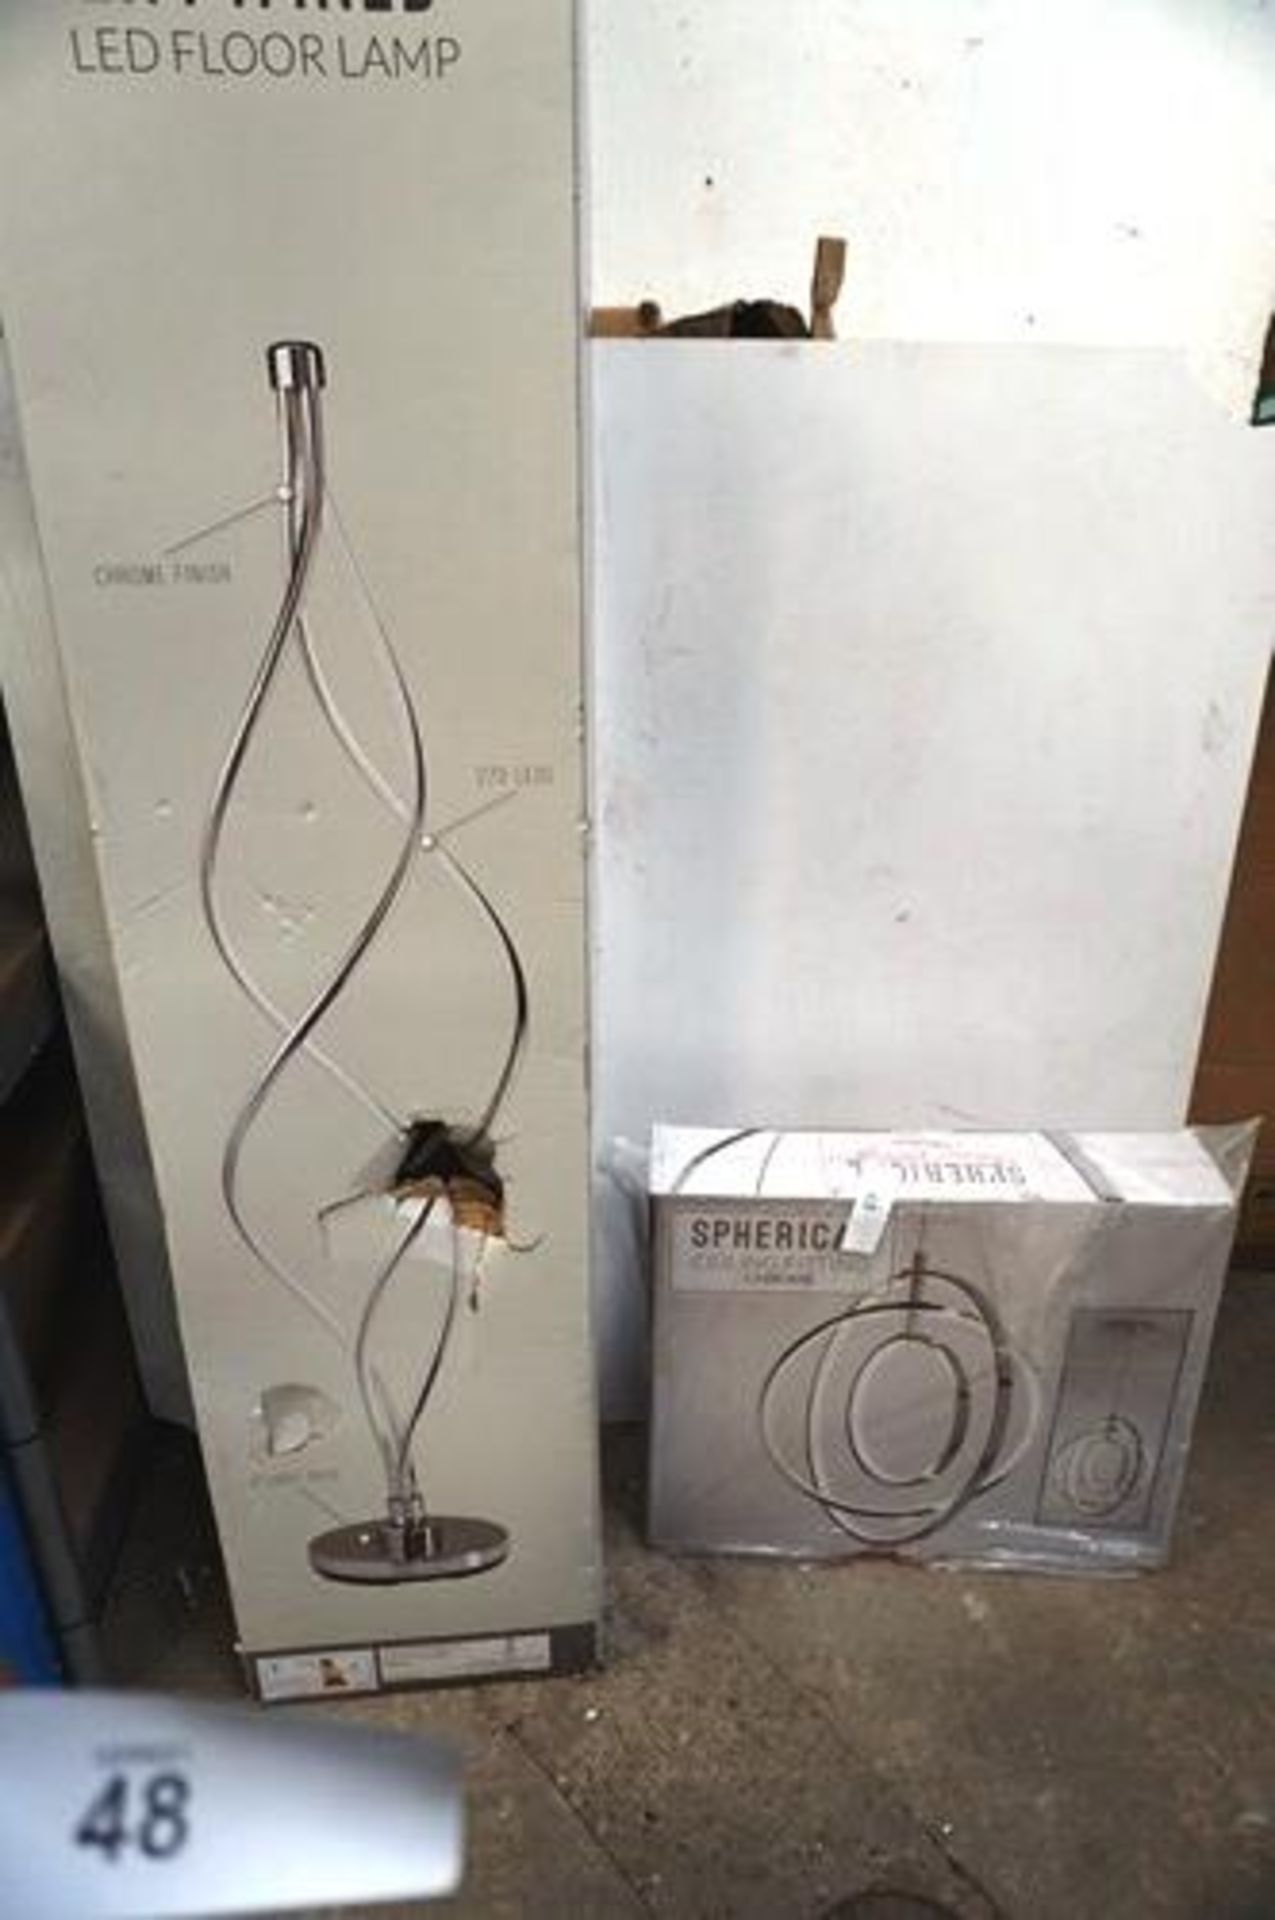 1 x chrome entwined LED floor lamp, SKU: 223505, together with 1 x chrome spherical ceiling fitting,